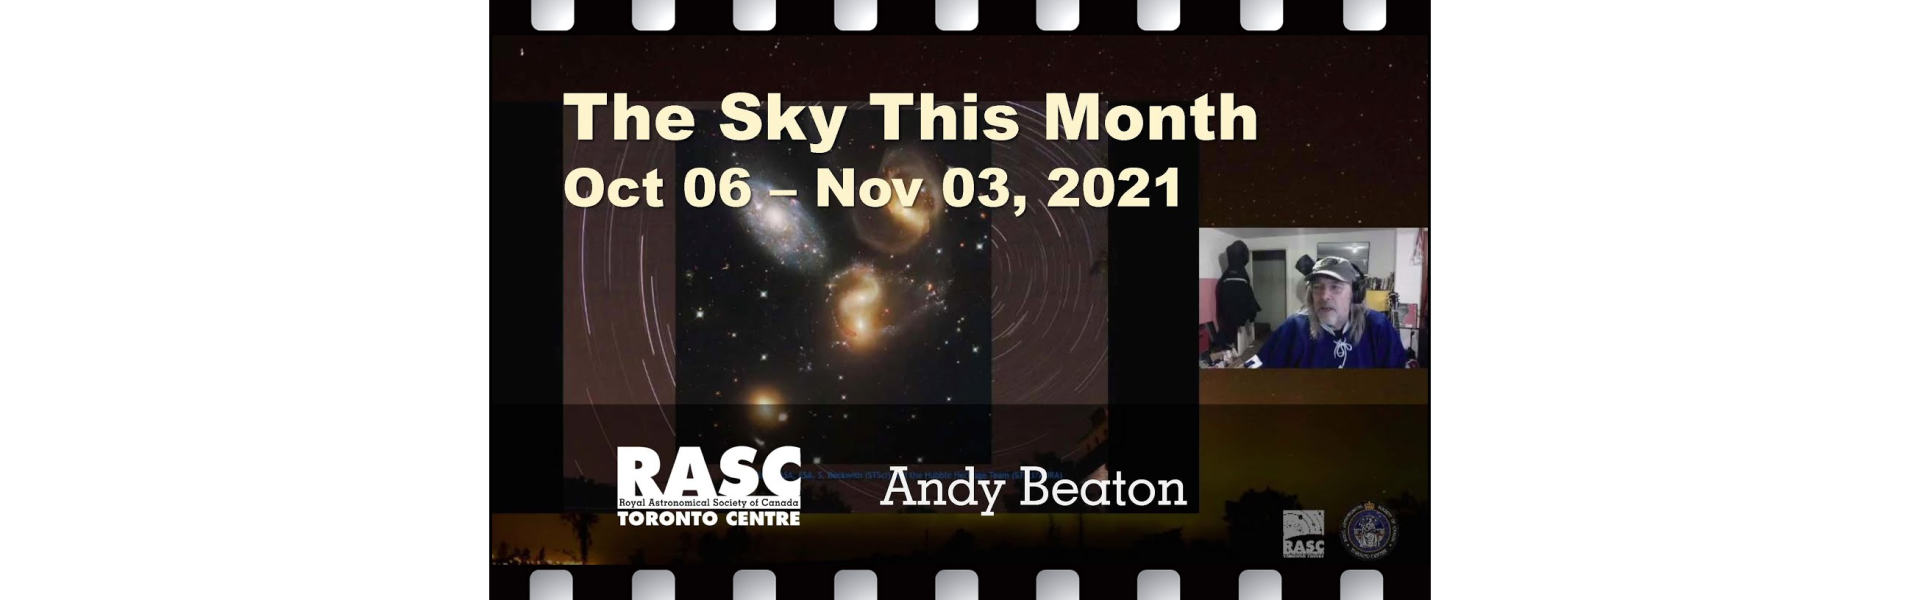 The Sky This Month October 6 - November 3, 2021